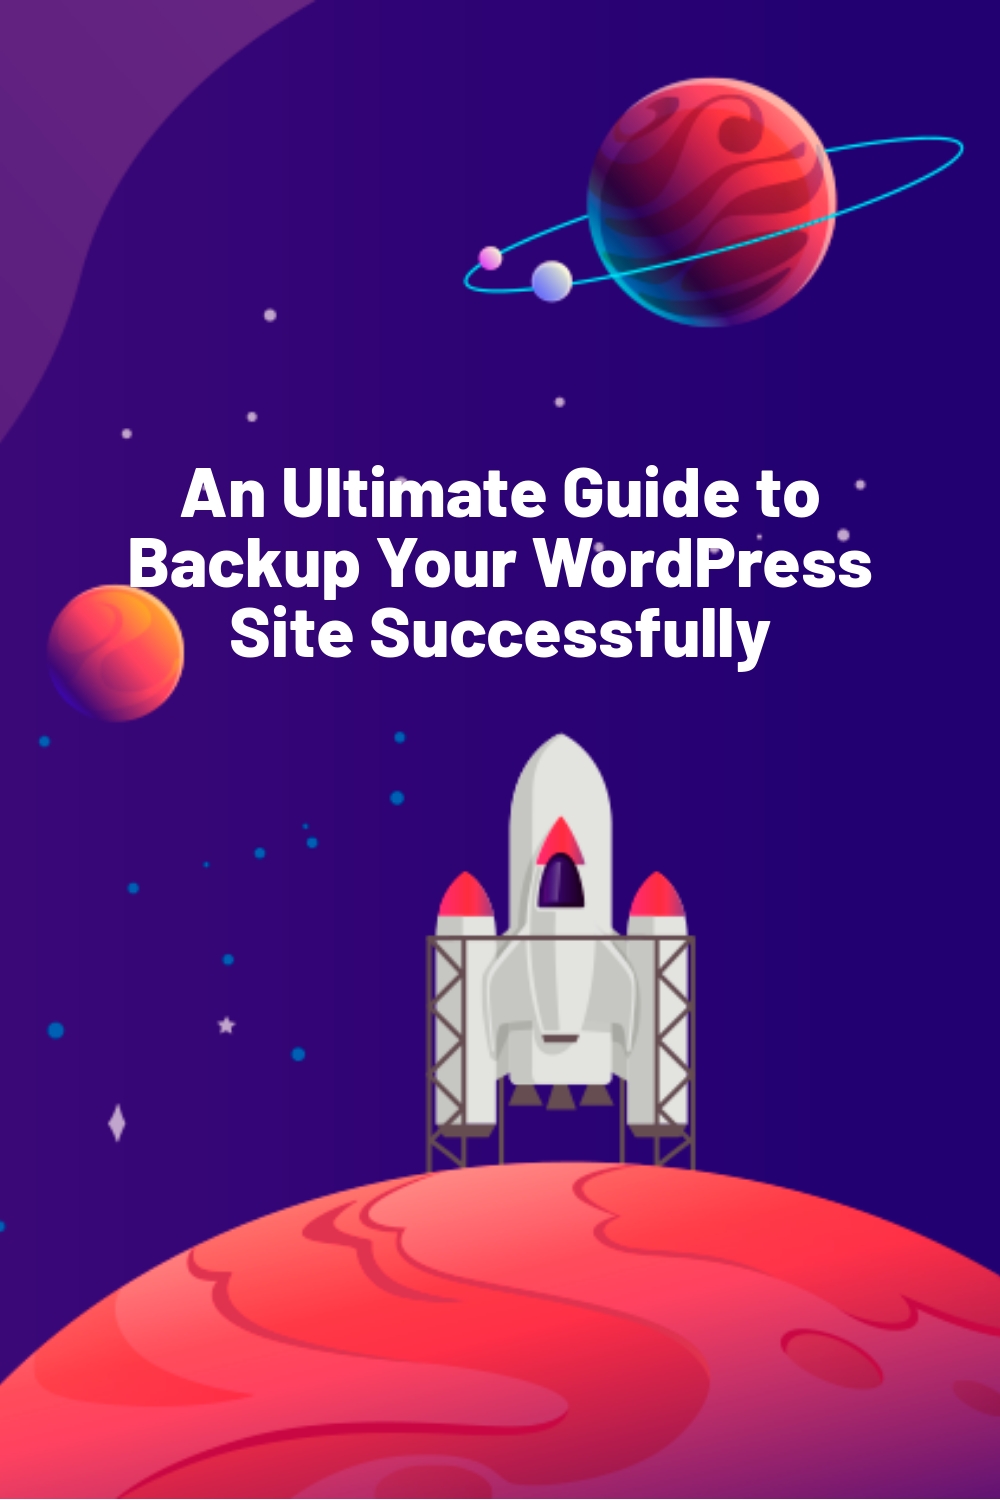 An Ultimate Guide to Backup Your WordPress Site Successfully